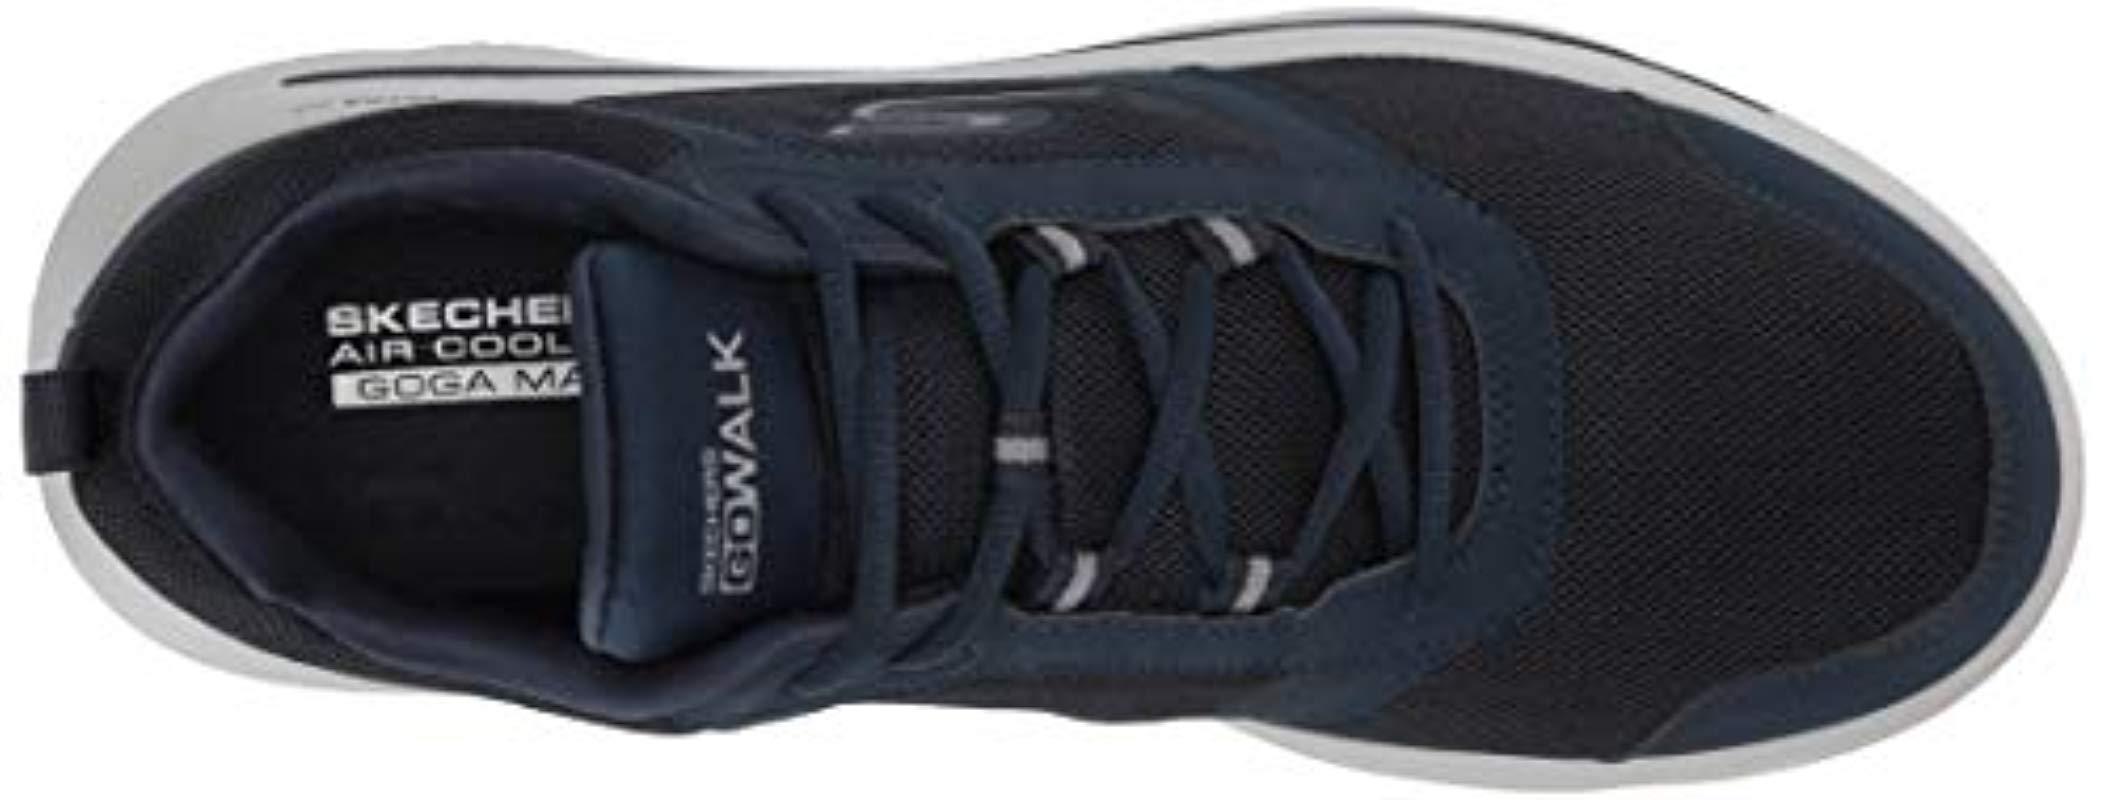 Skechers Navy/Grey Go Walk Evolution Ultra Enhan Mens Lace Up Shoes - Style  ID: 54734